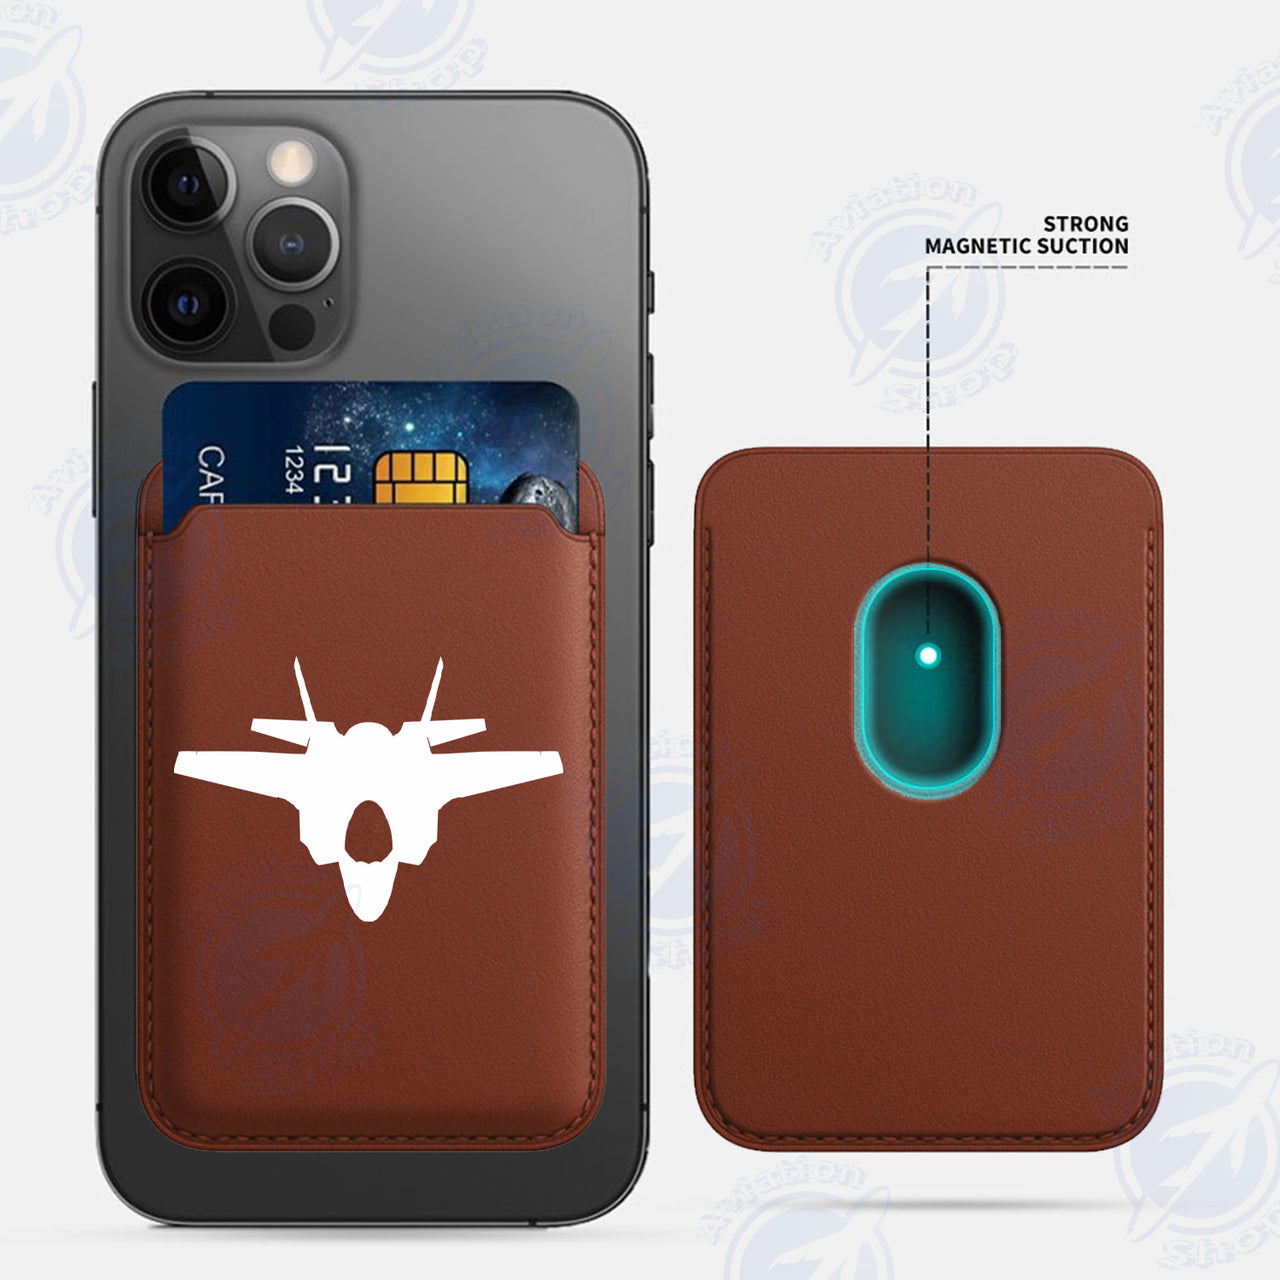 Lockheed Martin F-35 Lightning II Silhouette iPhone Cases Magnetic Card Wallet